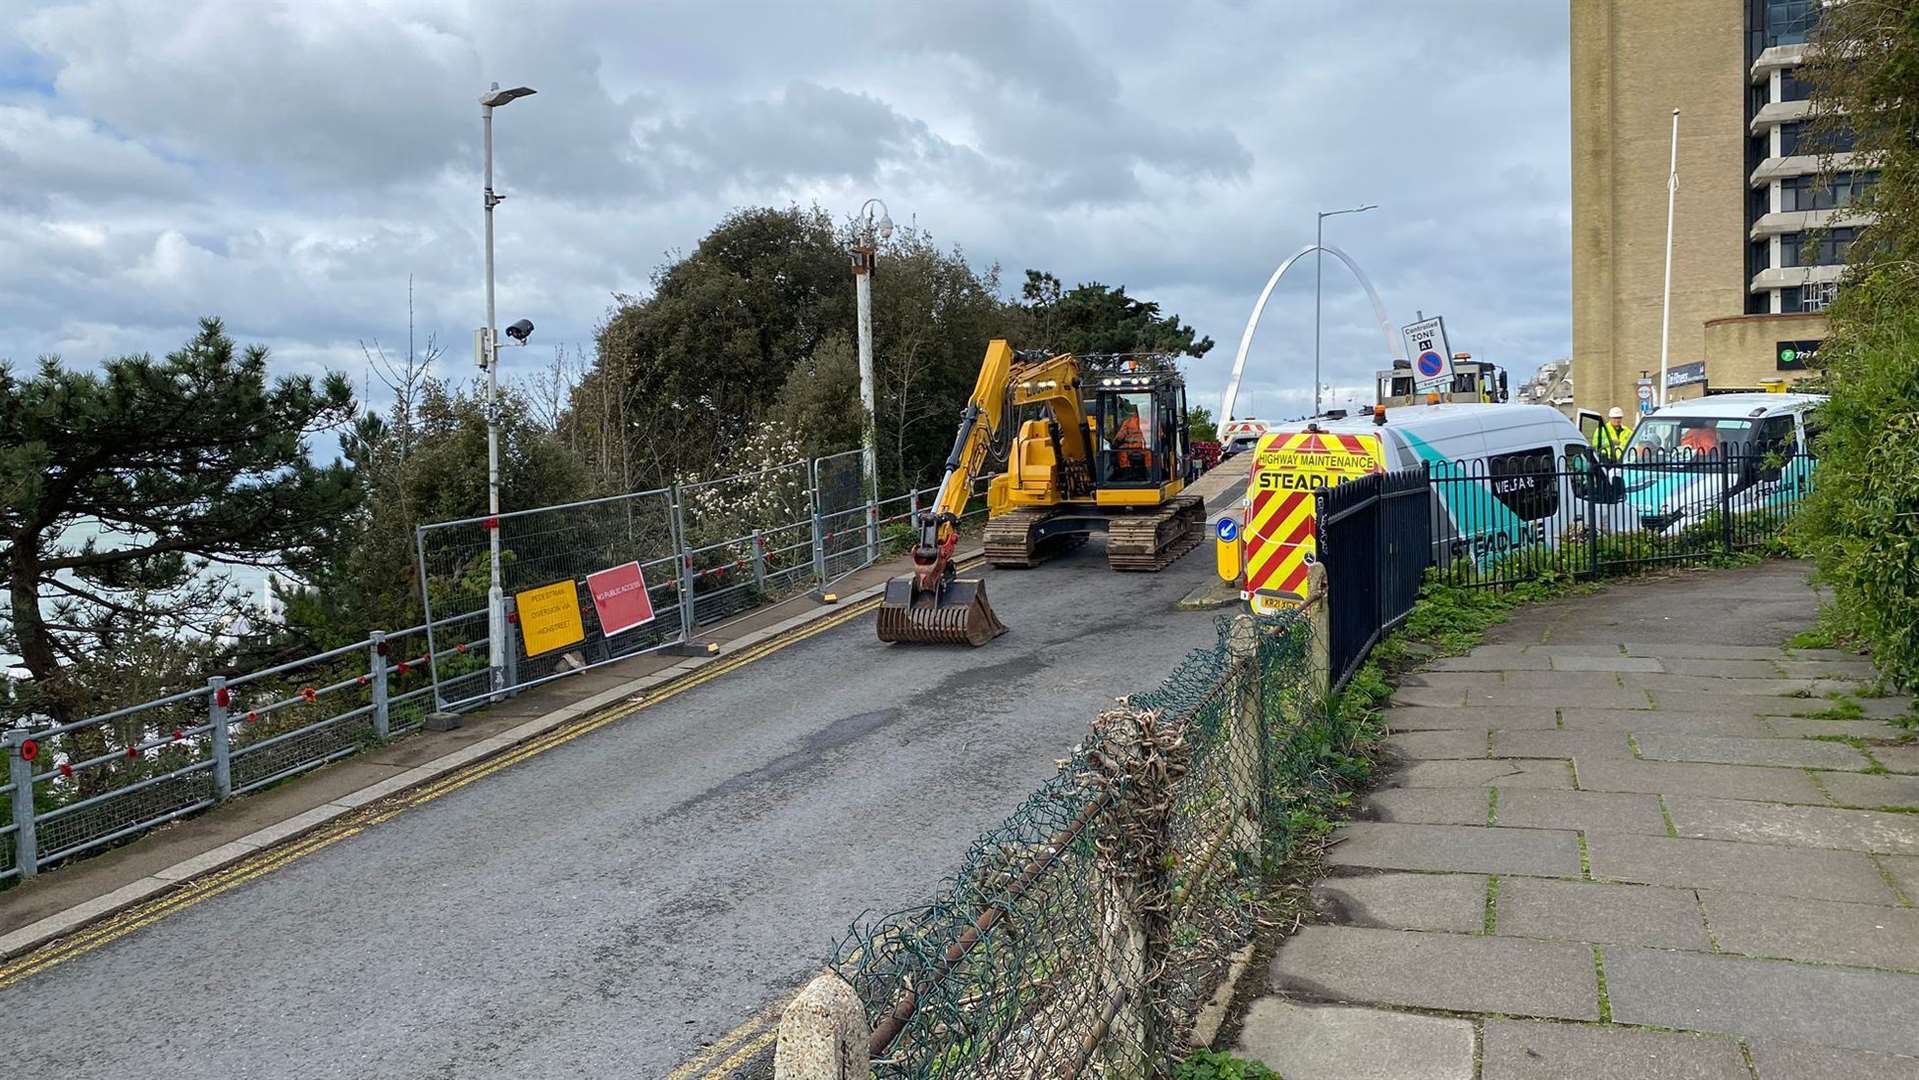 Diggers and other work vehicles have been spotted on the Road of Remembrance in Folkestone, with work finally underway to clear the route that has been closed since January. Pictures credit: Stephen West